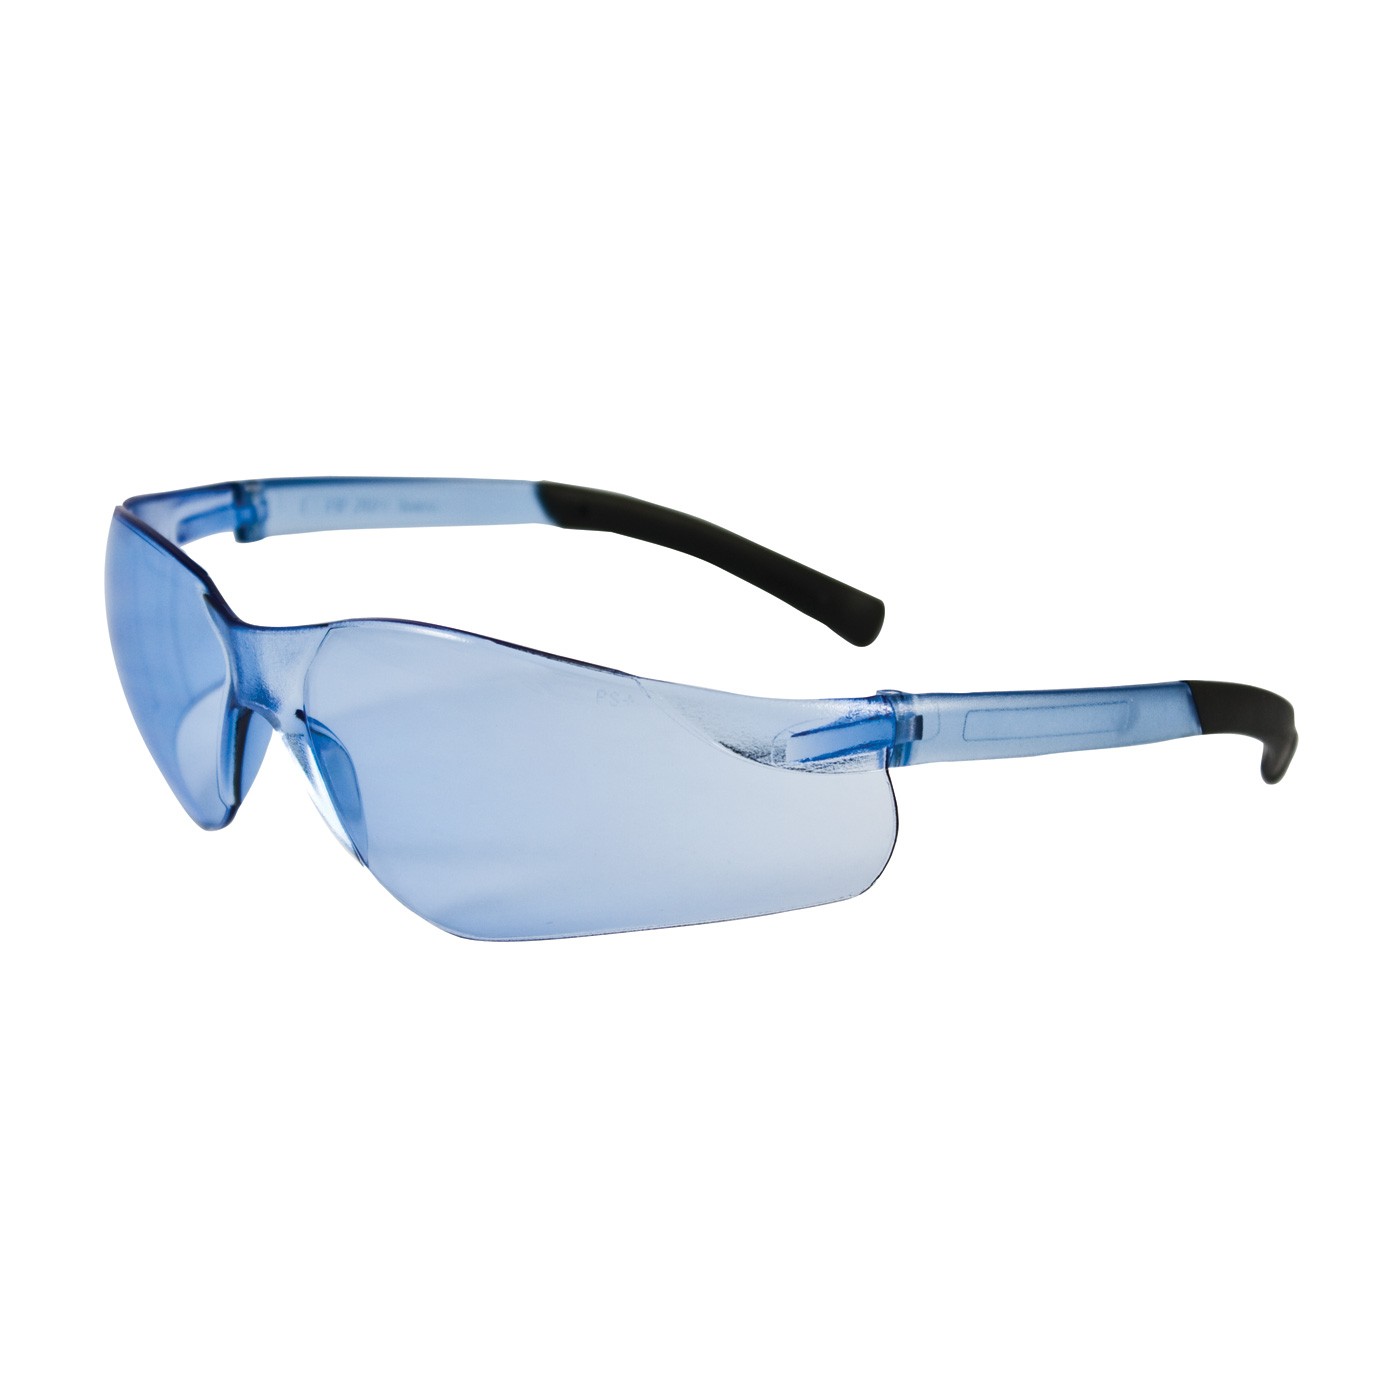 Zenon Z13™ Rimless Safety Glasses with Light Blue Temple, Light Blue Lens and Anti-Scratch Coating  (#250-06-5503)